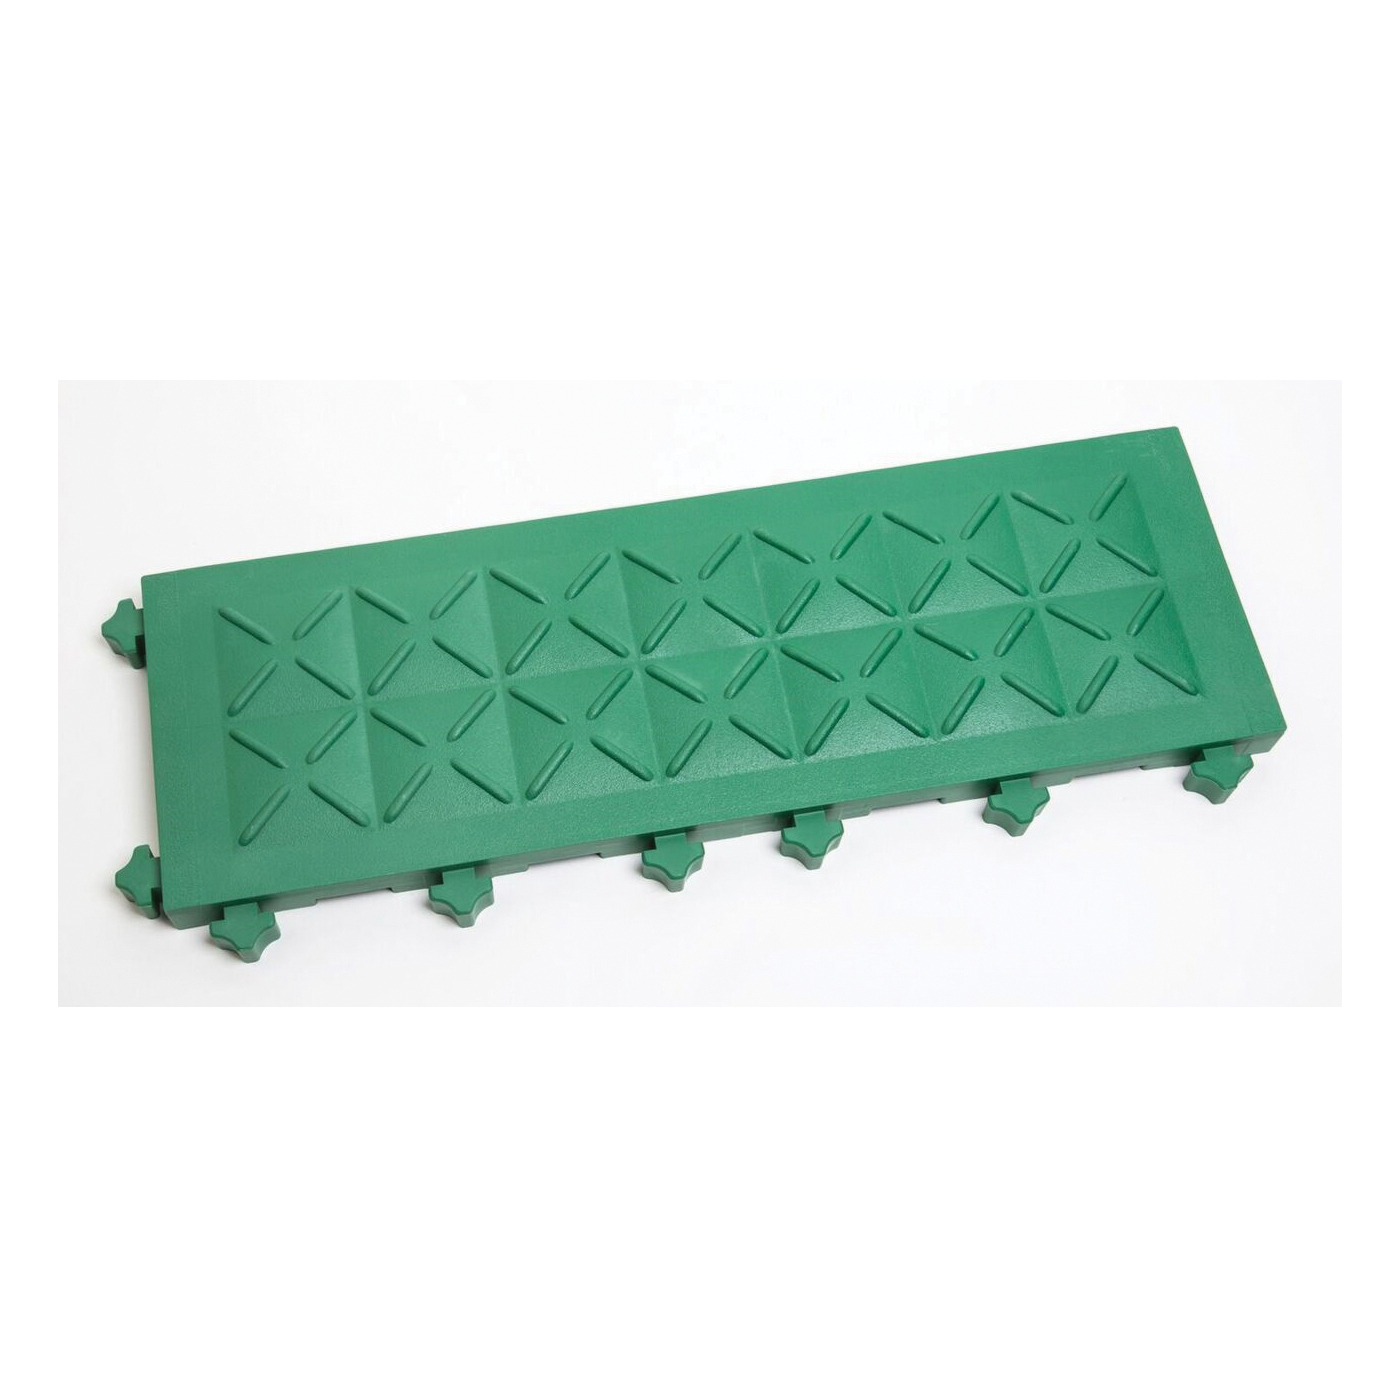 Ergo Advantage AG7-B Closed Highlighter Anti-Fatigue Mat, 6 in W x 1 in THK, PVC, Patented Ergonomic Domes With Anti-Slip Grit Surface Pattern, PVC Base, Resists: Fire